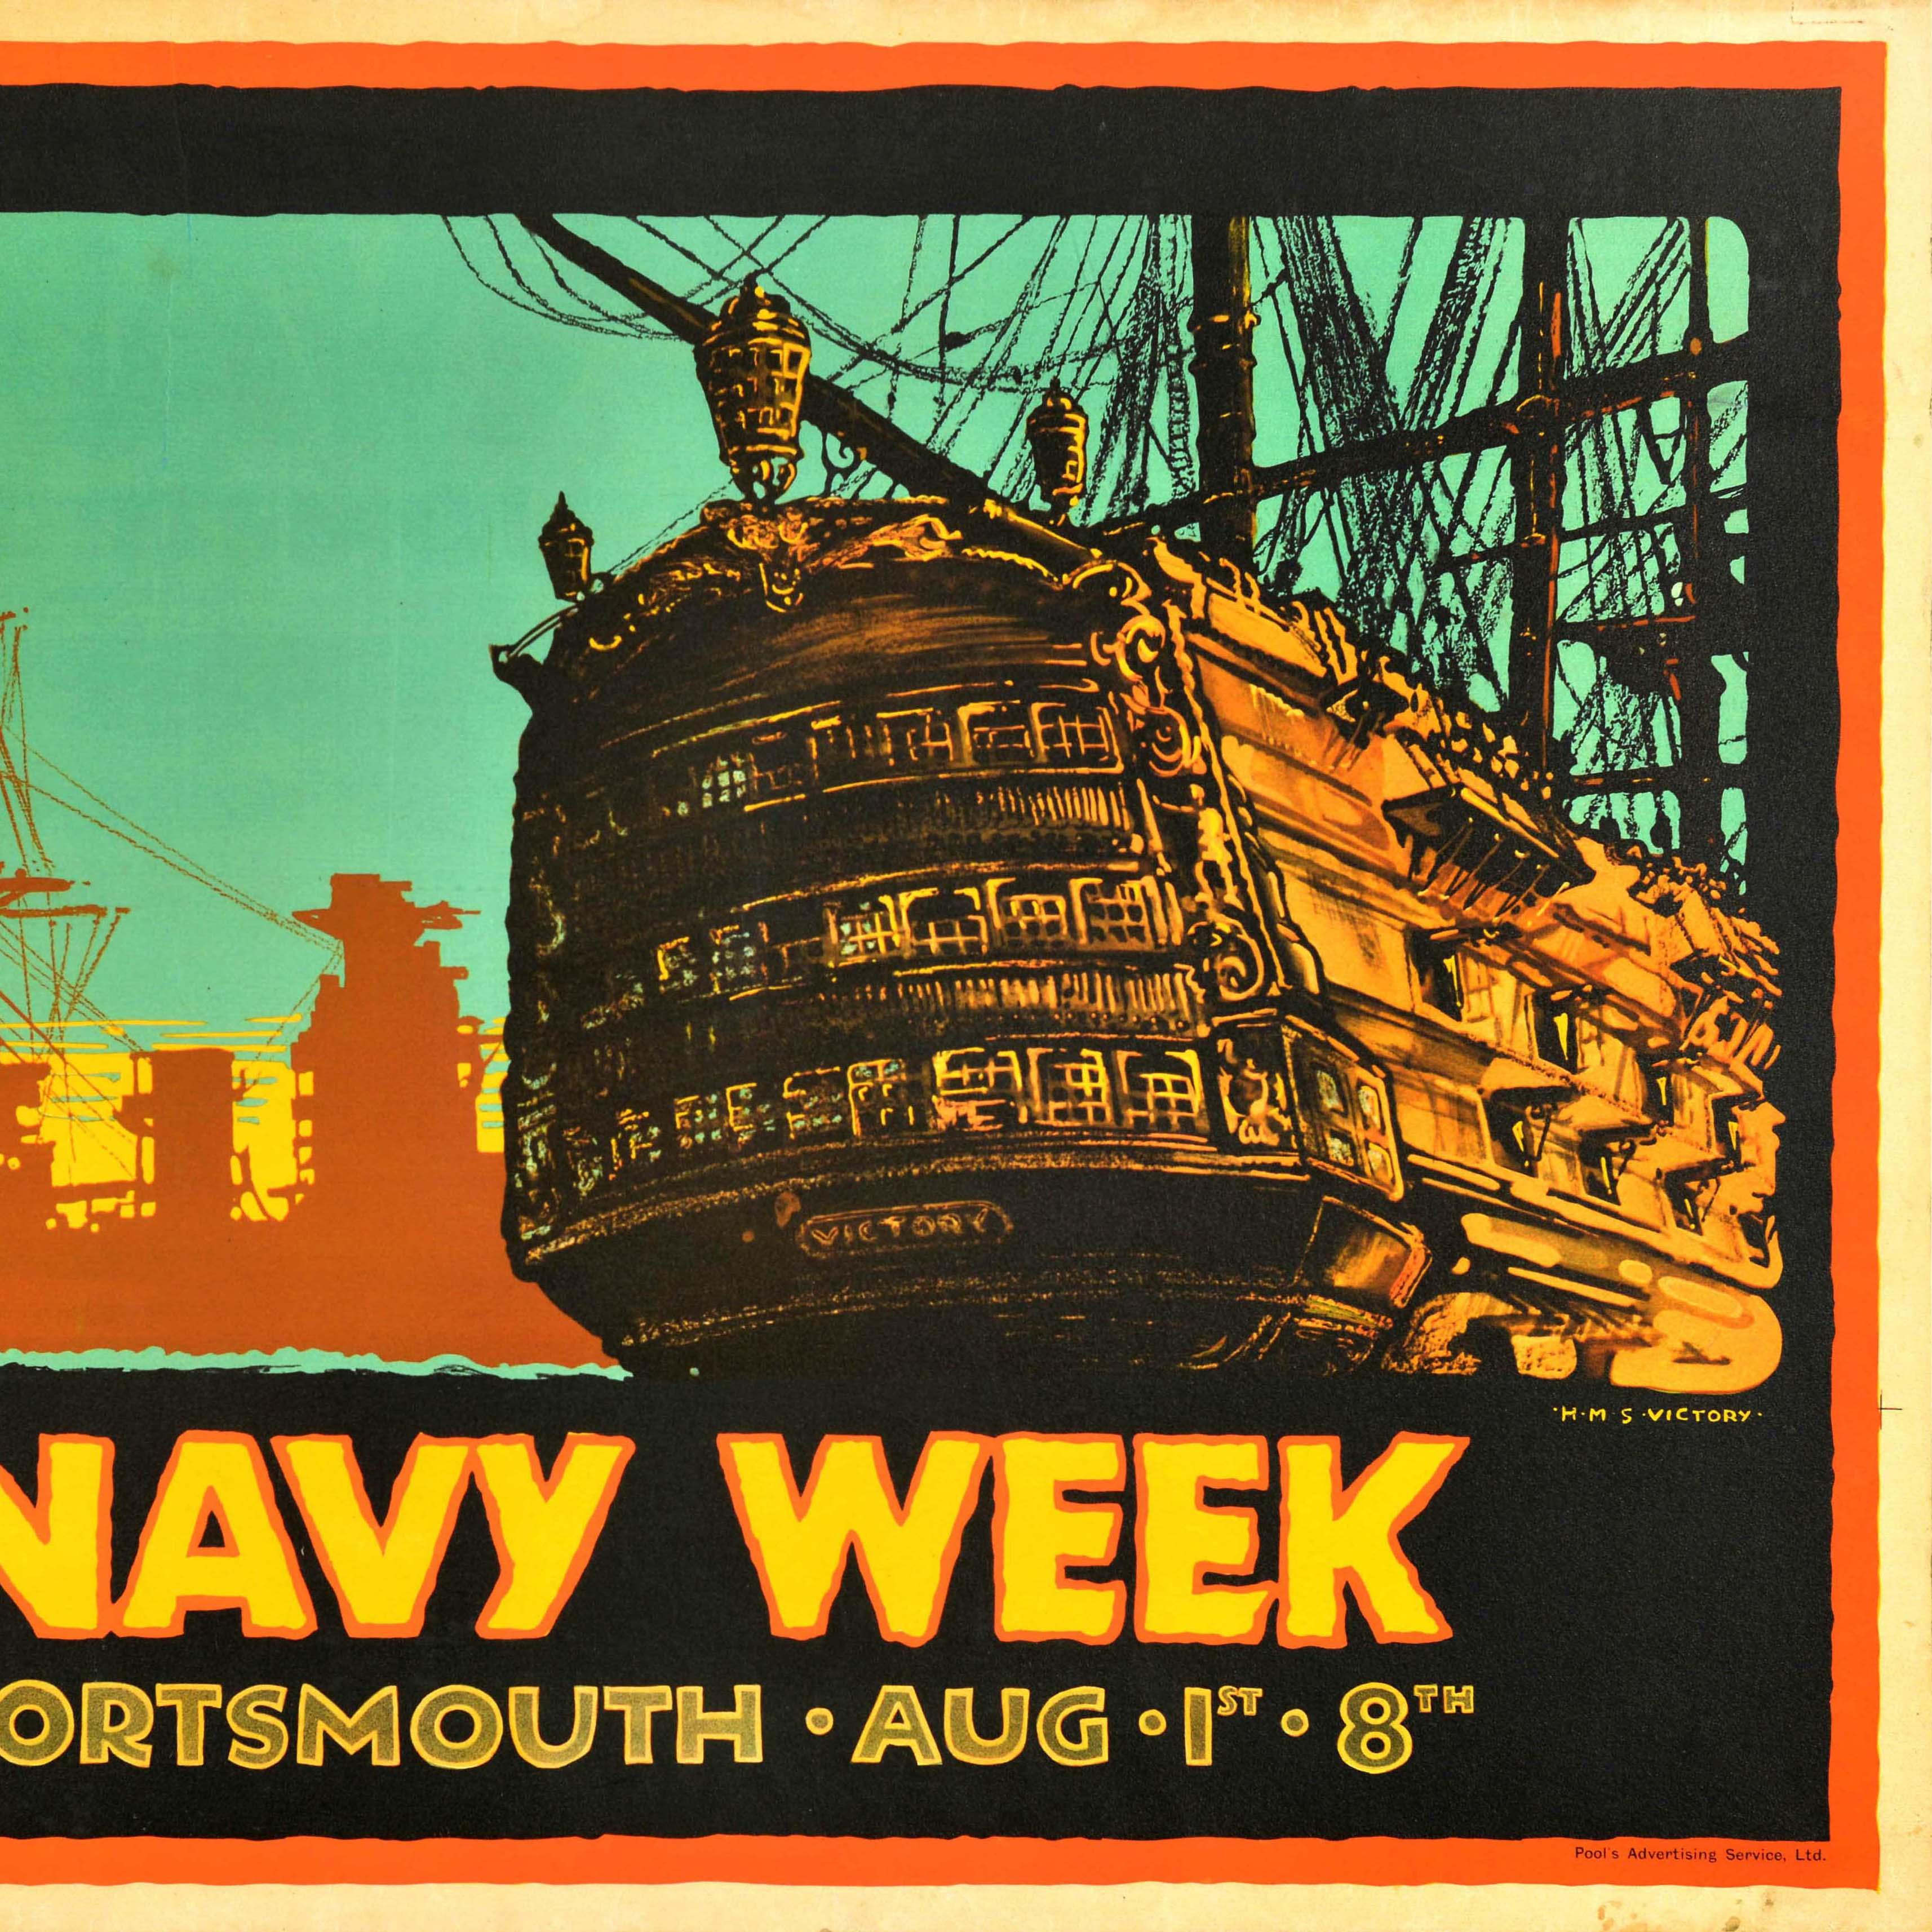 British Original Vintage Advertising Poster Navy Week Portsmouth HMS Nelson Victory Ship For Sale